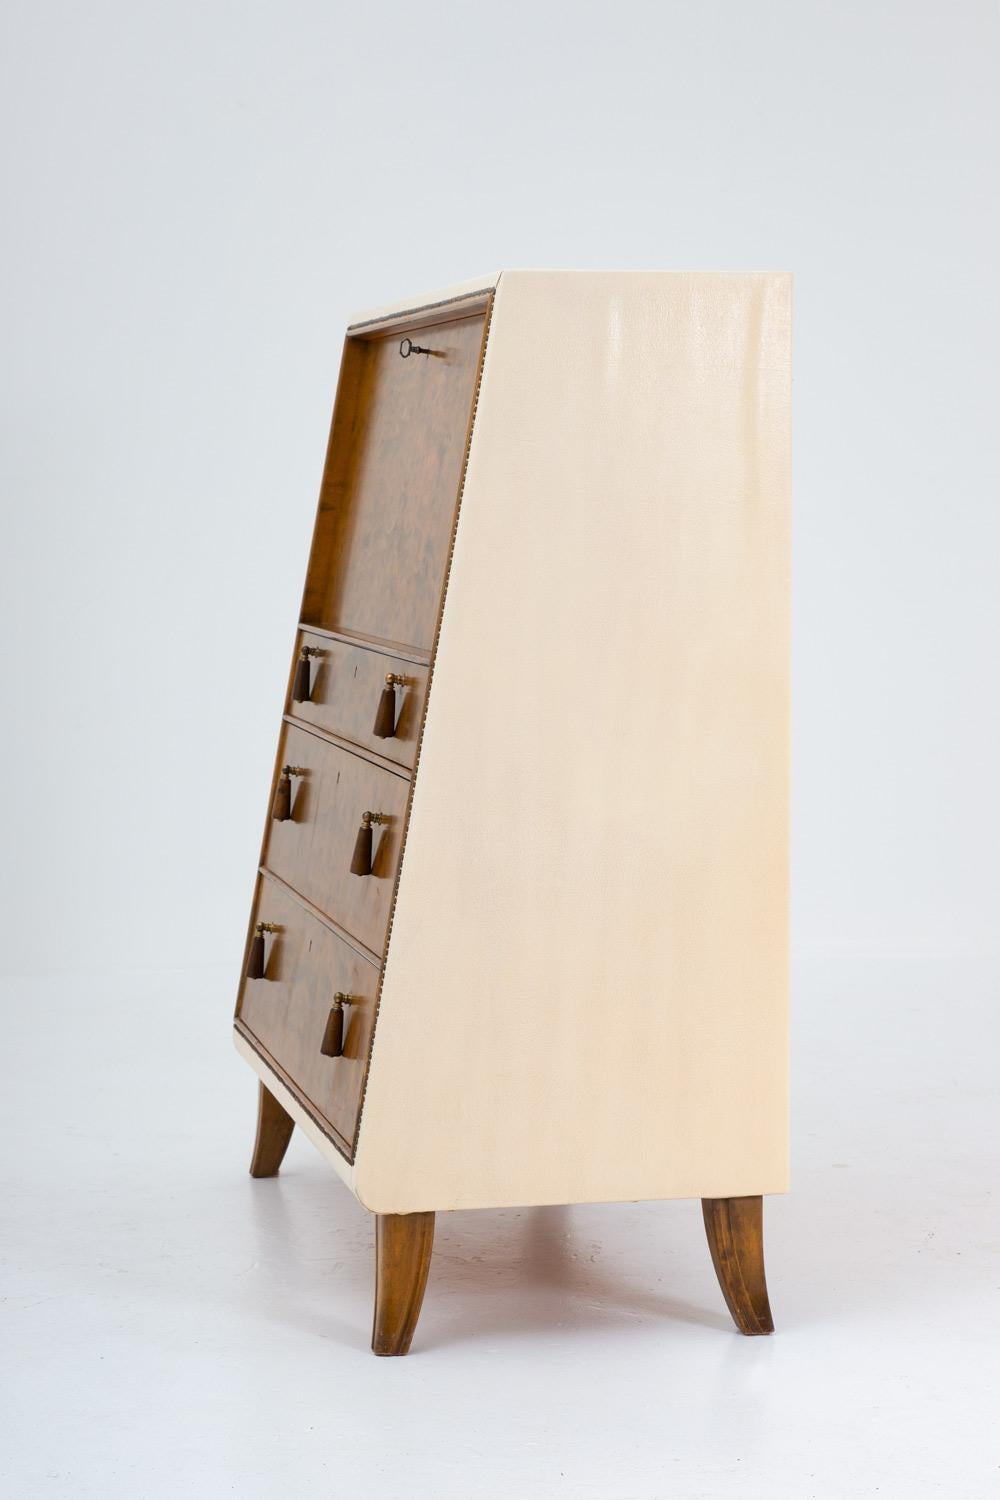 20th Century Swedish Modern Bureau by Otto Schulz for Boet, 1940s For Sale